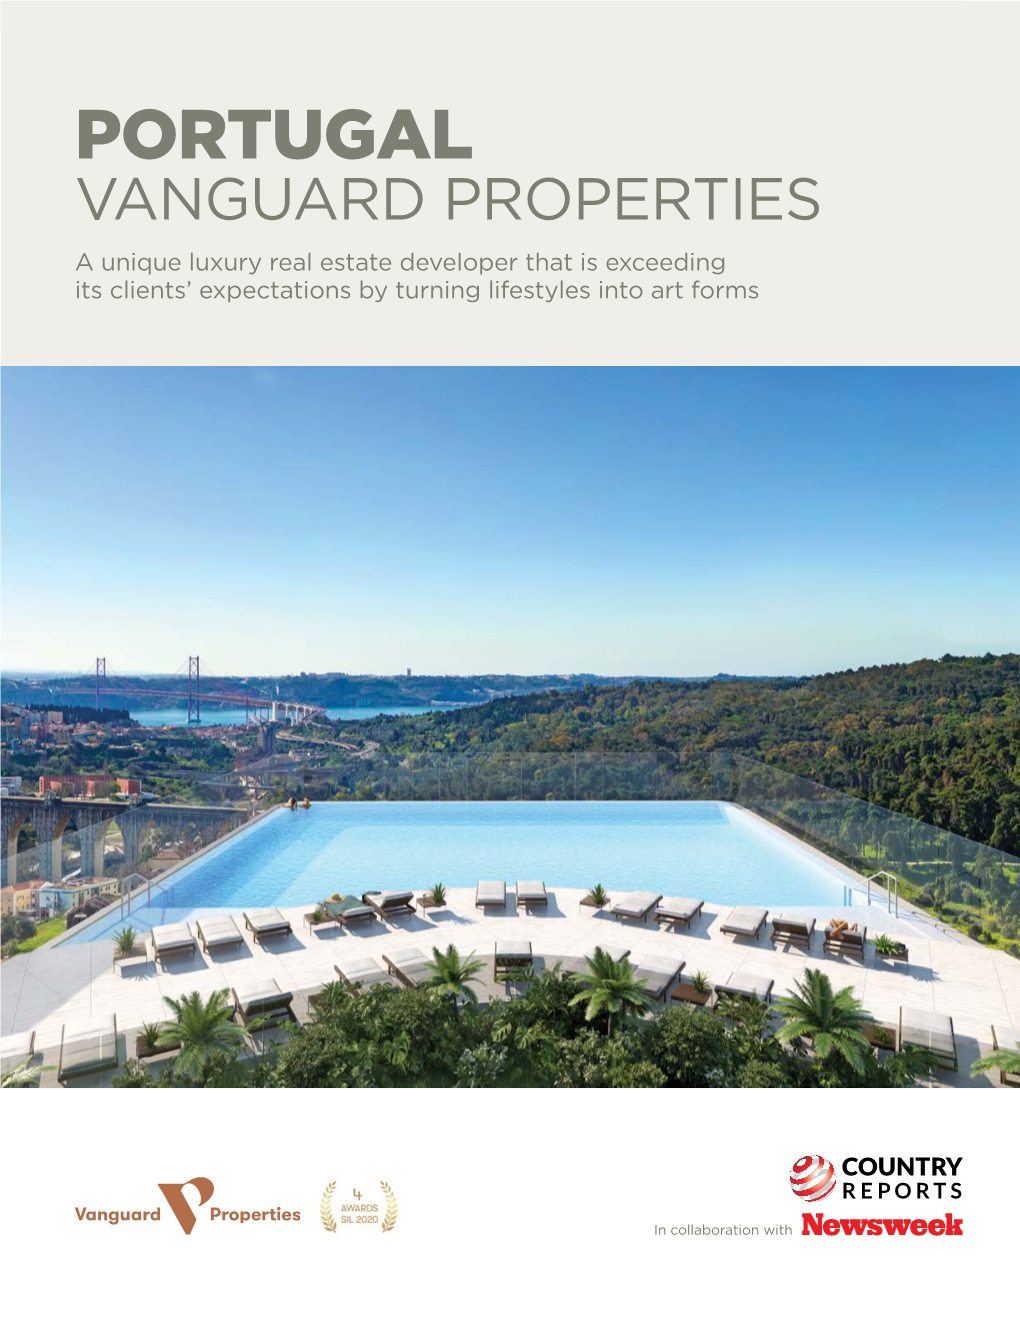 PORTUGAL VANGUARD PROPERTIES a Unique Luxury Real Estate Developer That Is Exceeding Its Clients’ Expectations by Turning Lifestyles Into Art Forms